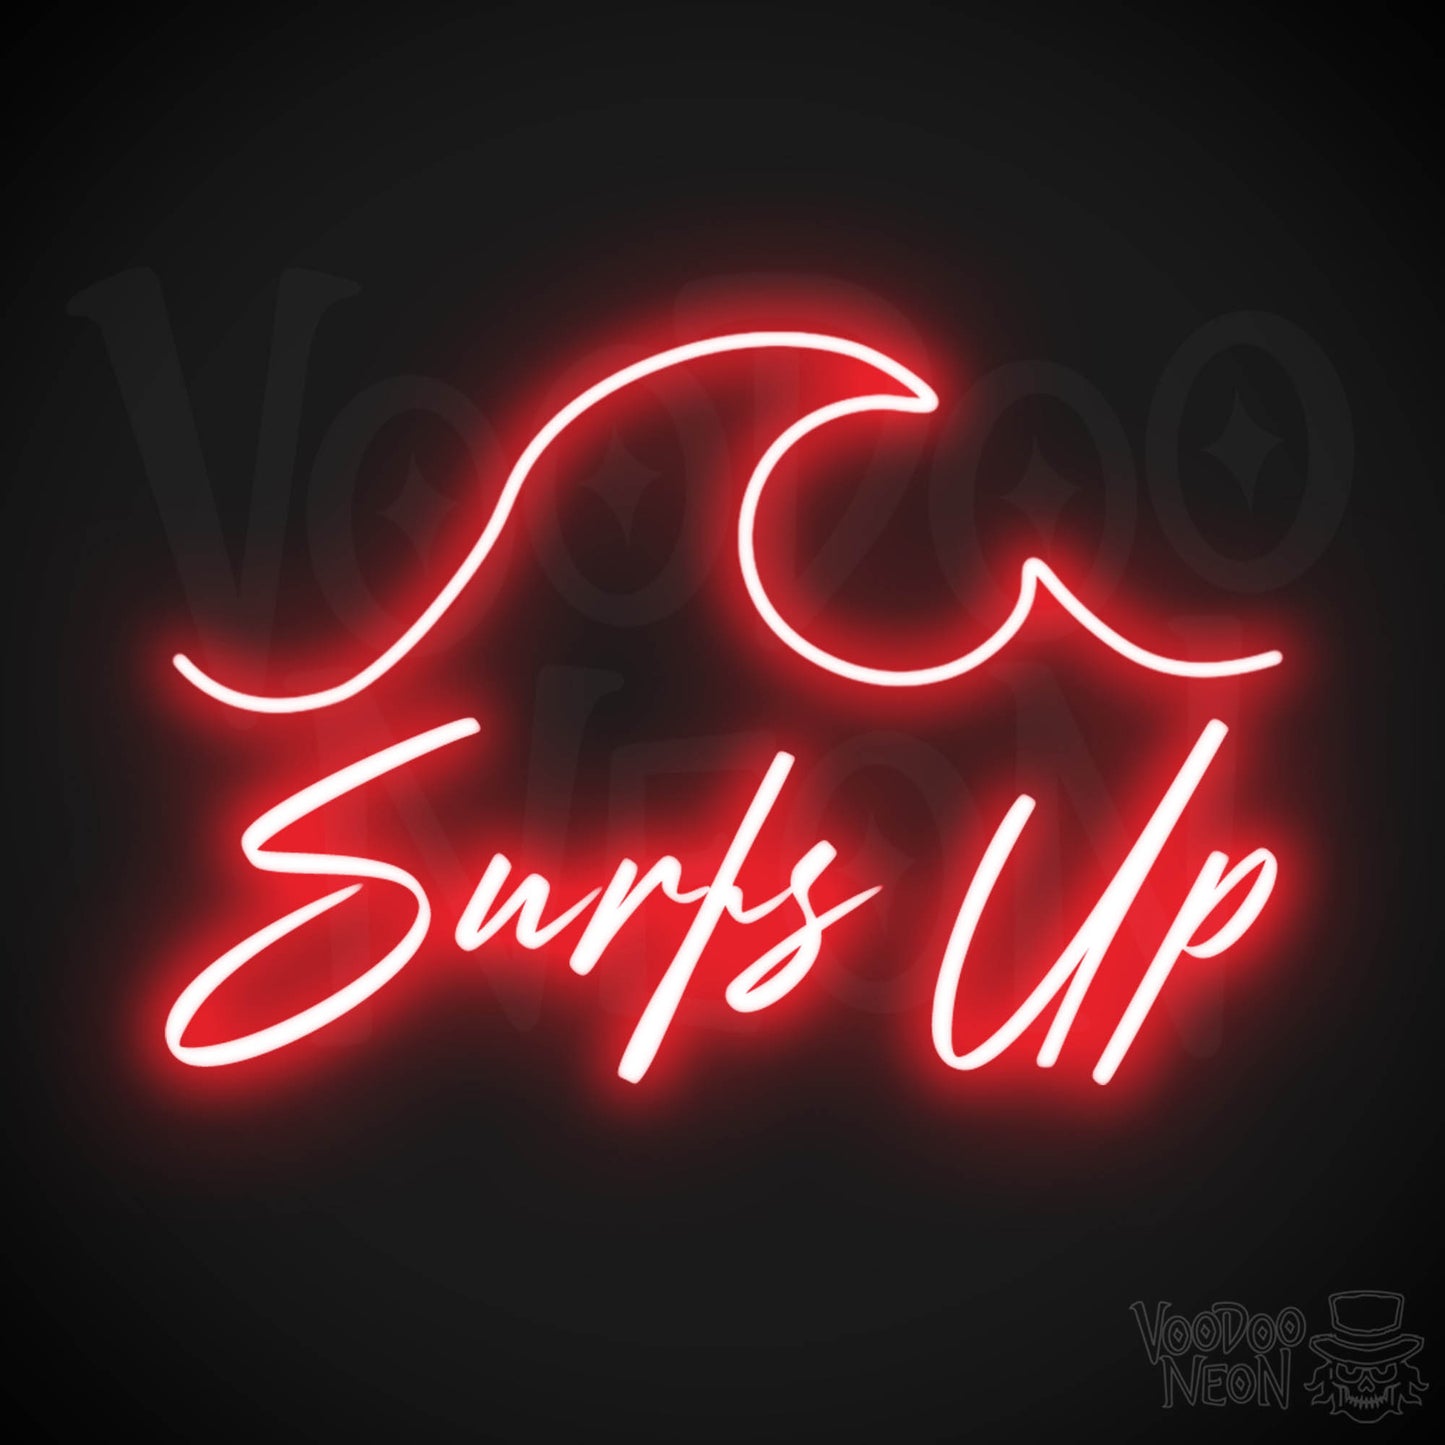 Surfs Up Neon Sign - Neon Surfs Up Wall Art - Neon Surf Sign - Color Red